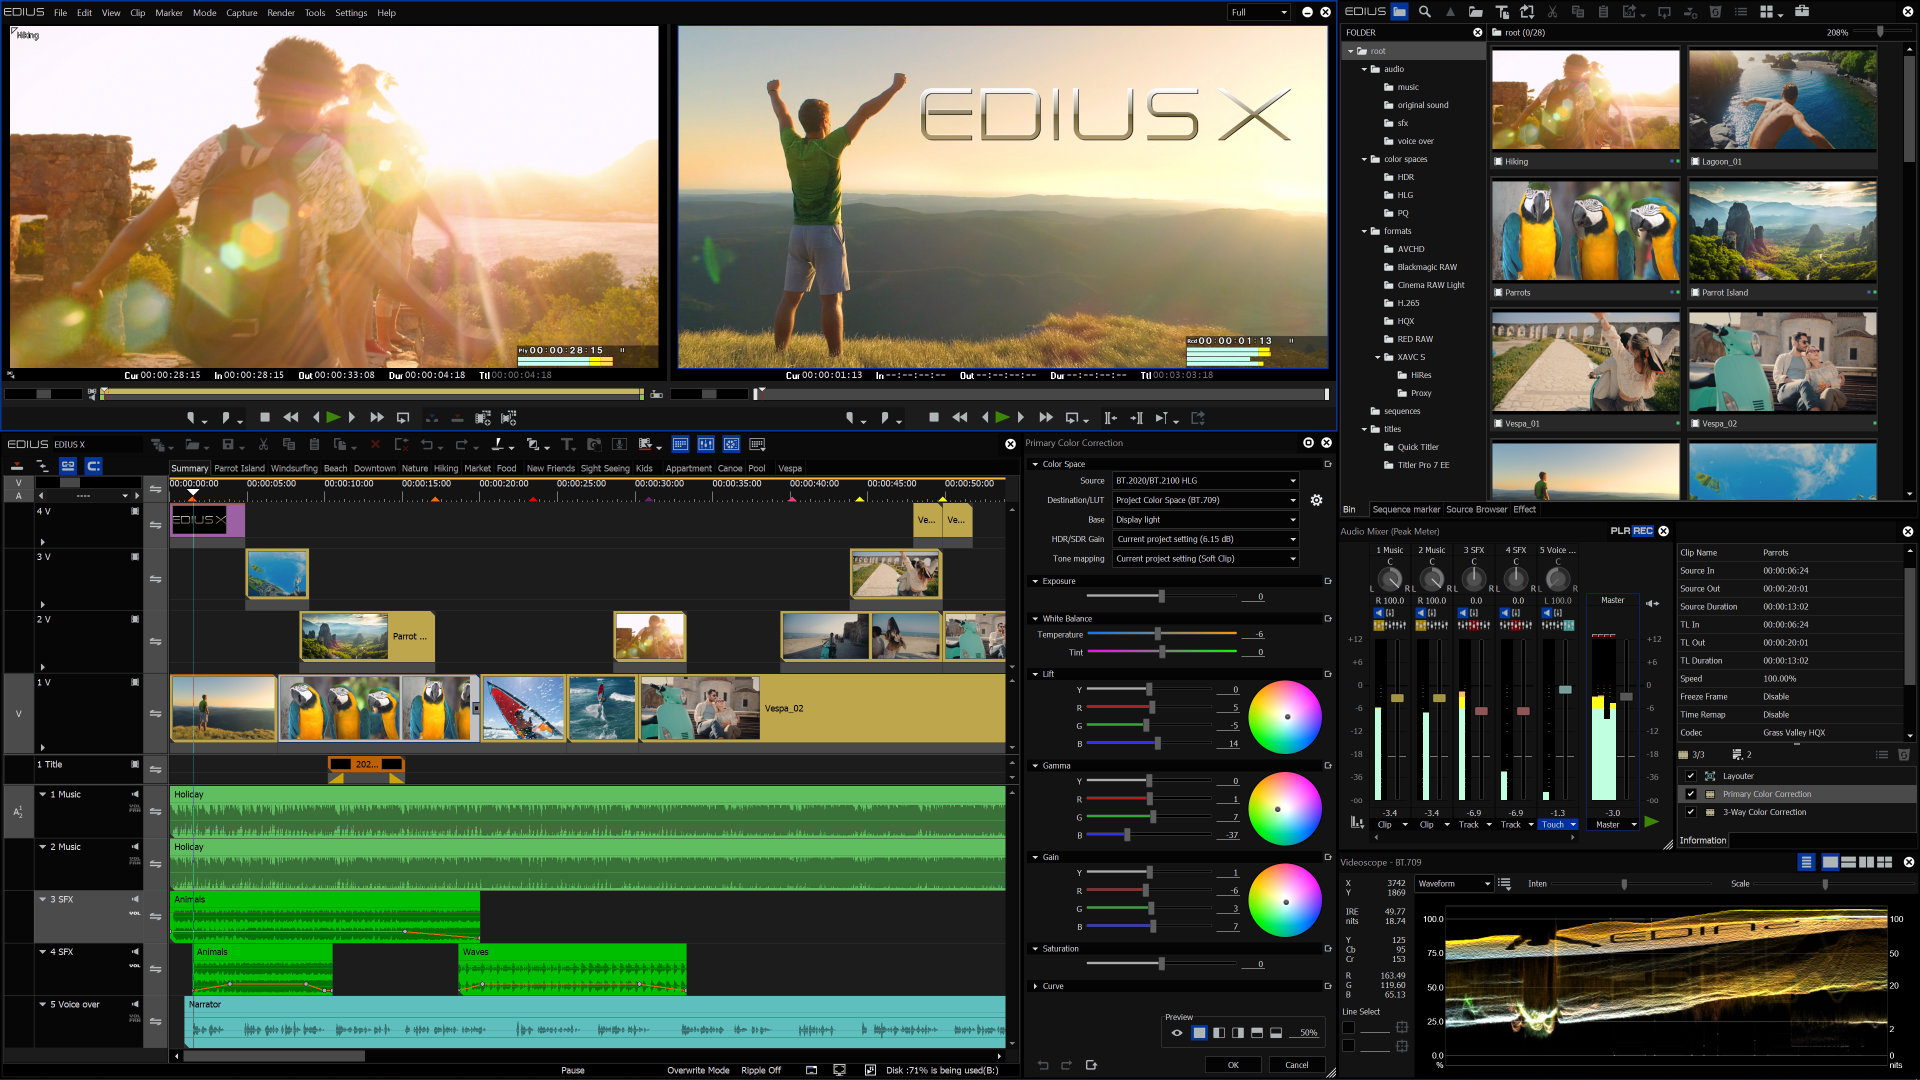 EDIUS X Version 10.34 now with NDI output support